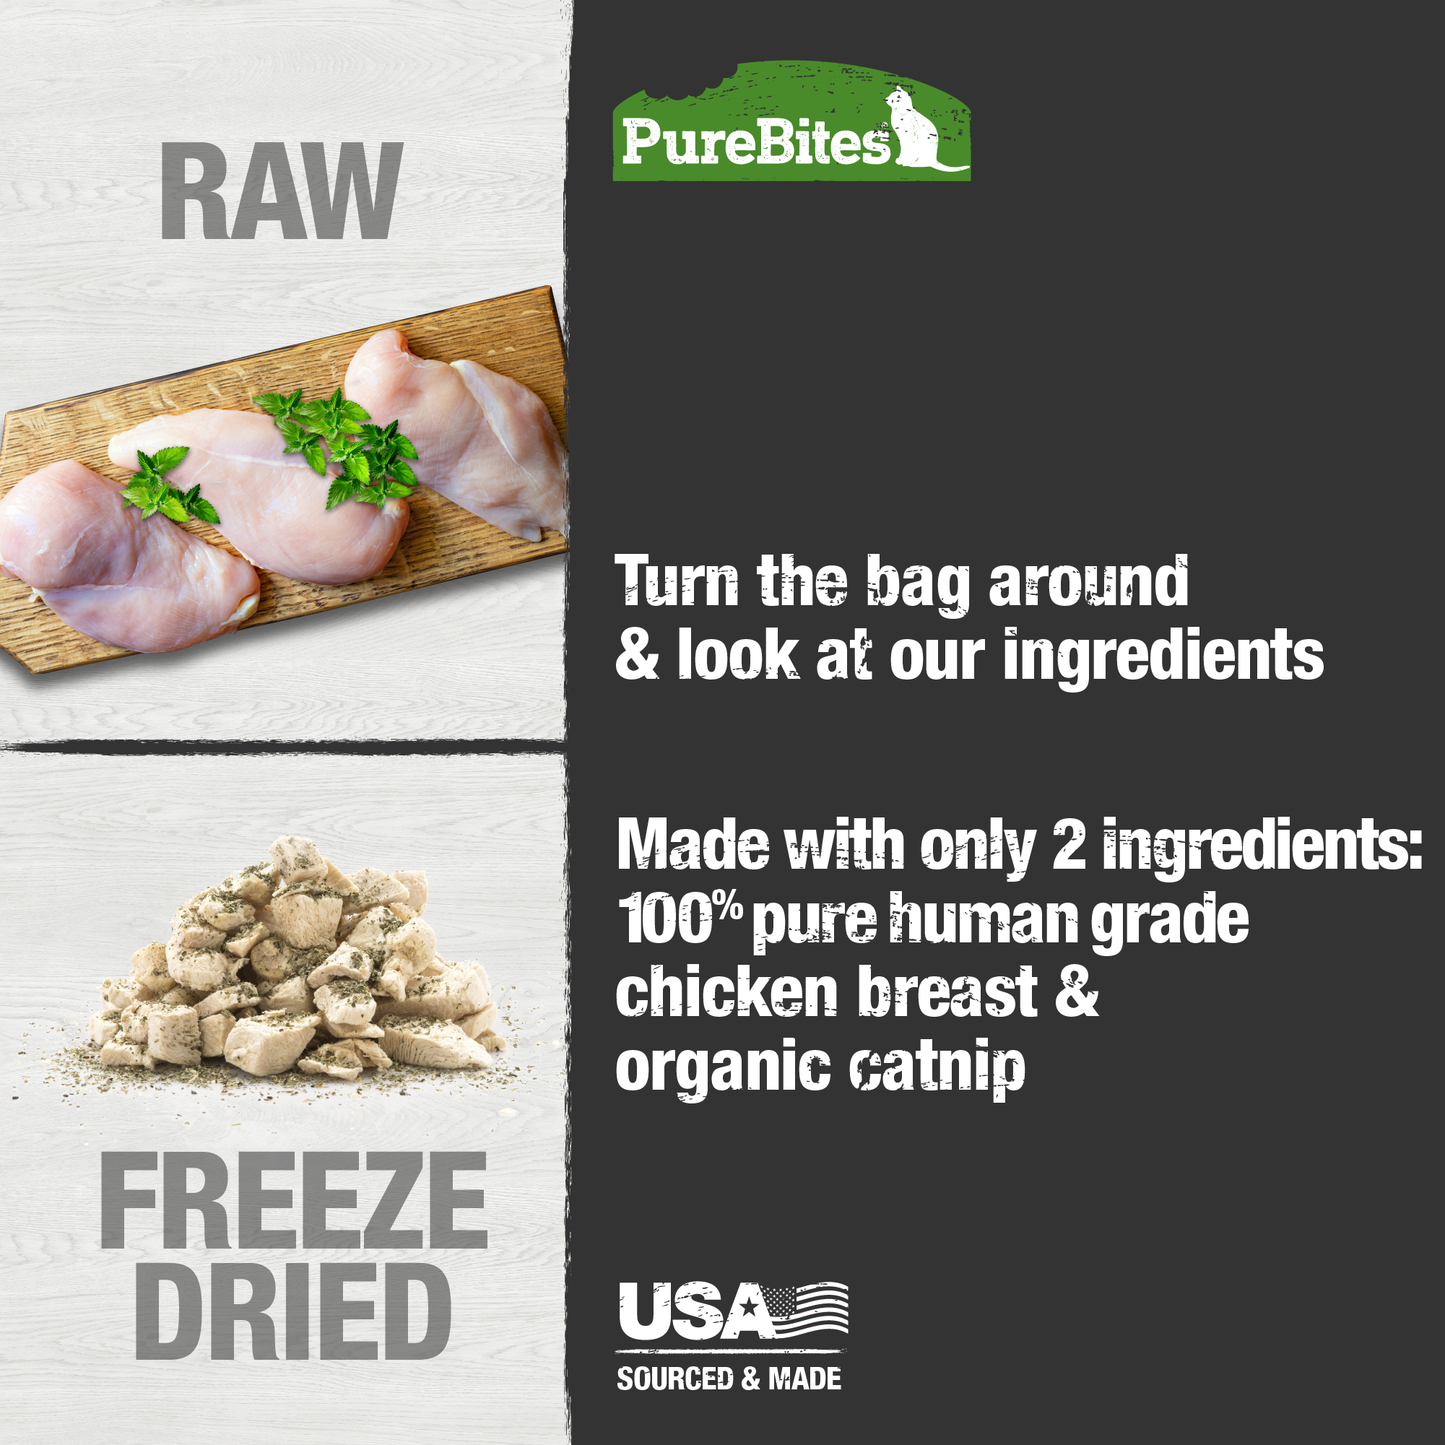 Made with only 2 Ingredients you can read, pronounce, and trust: USA sourced human grade chicken breast, catnip.